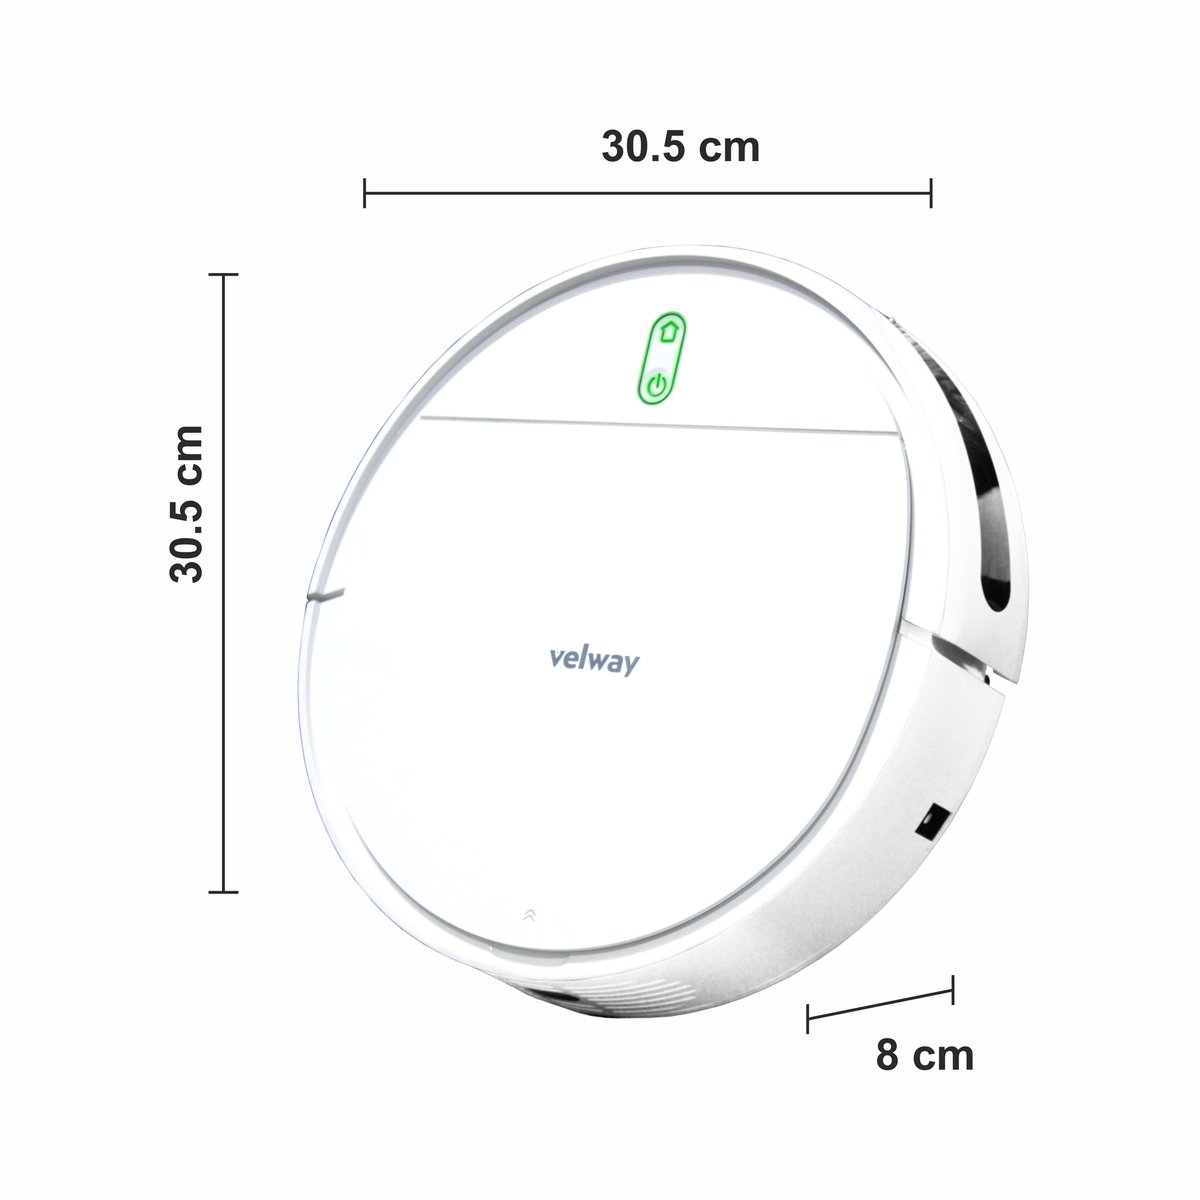 Velway V8s Smart Robotic Vacuum Cleaner With High Suction With WiFi Connected Compatible With Alexa & Google Home, Mapping & Ultra Power Navigation.
Product Link:- ilifeshop.in/ilife/robotic-…
#ilife #velway #amour #v8s #roboticvacuum #cleaning #smarthome #robotcleaner